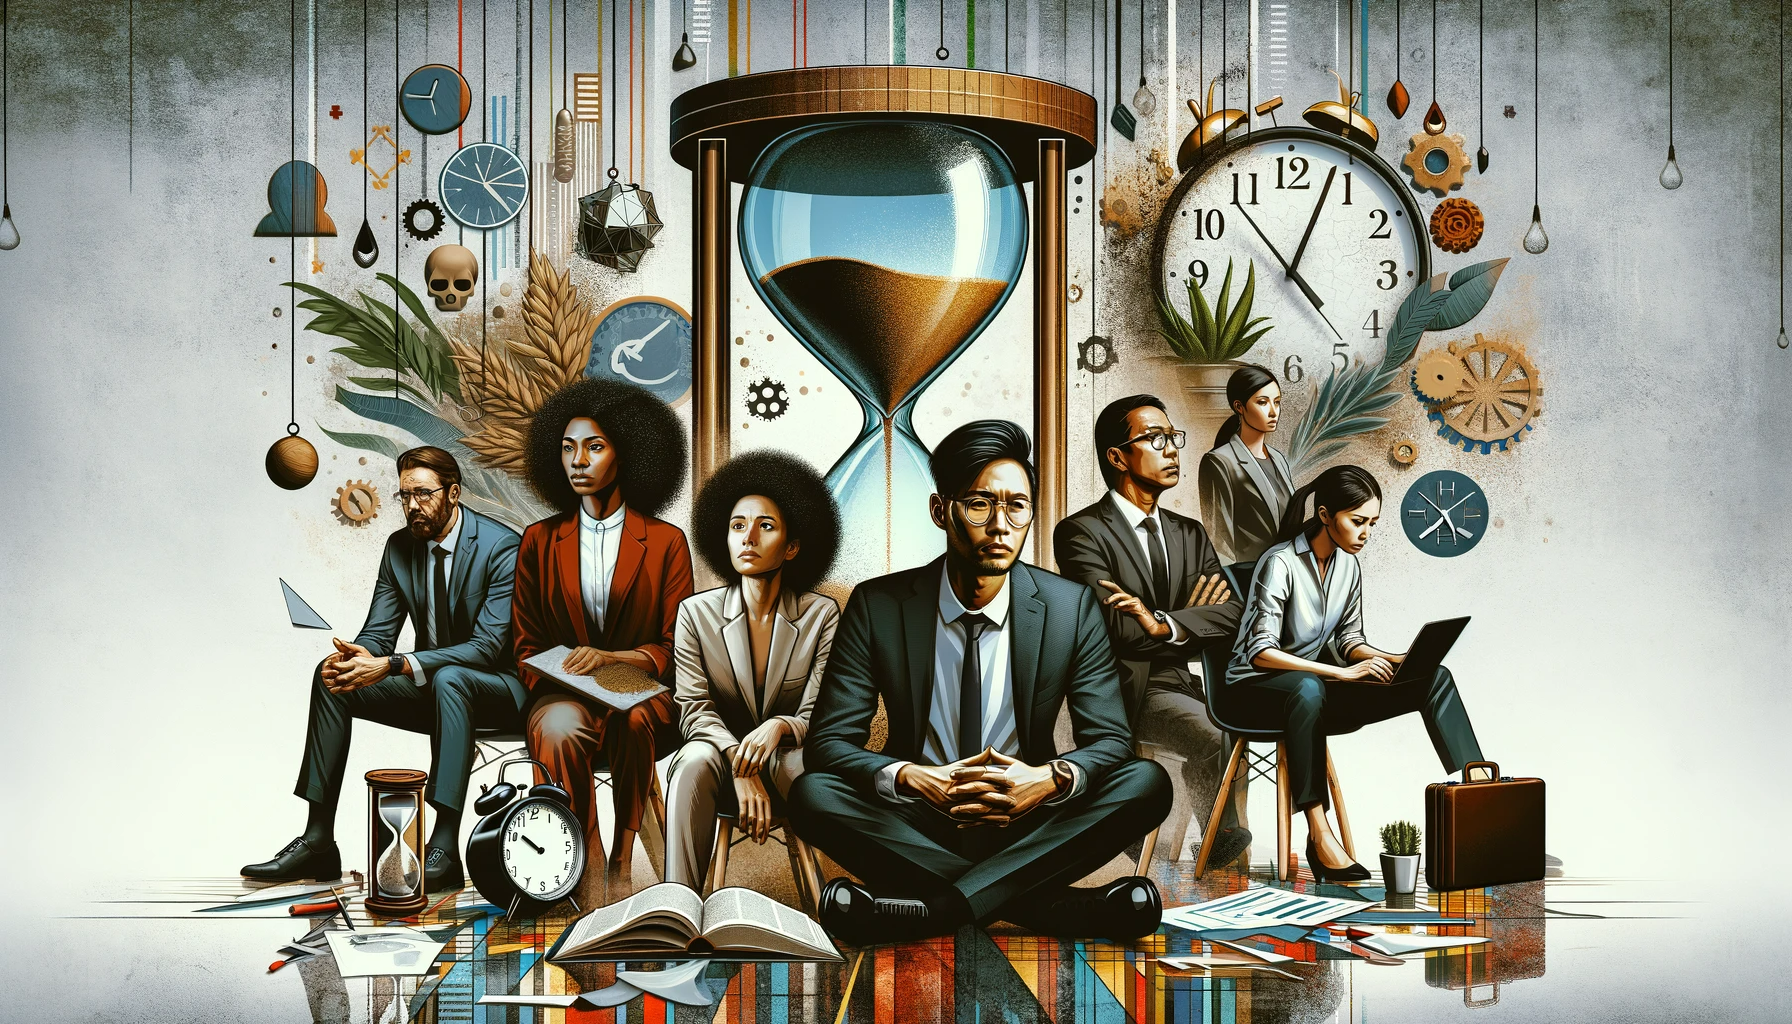 Image visually represents the concept of burnout in the corporate world, with elements like exhausted professionals, a broken hourglass / clock symbolizing time pressure, and background elements suggesting mental health awareness. The tone is serious and thought-provoking, reflecting the urgent need for mental health initiatives in the workplace.